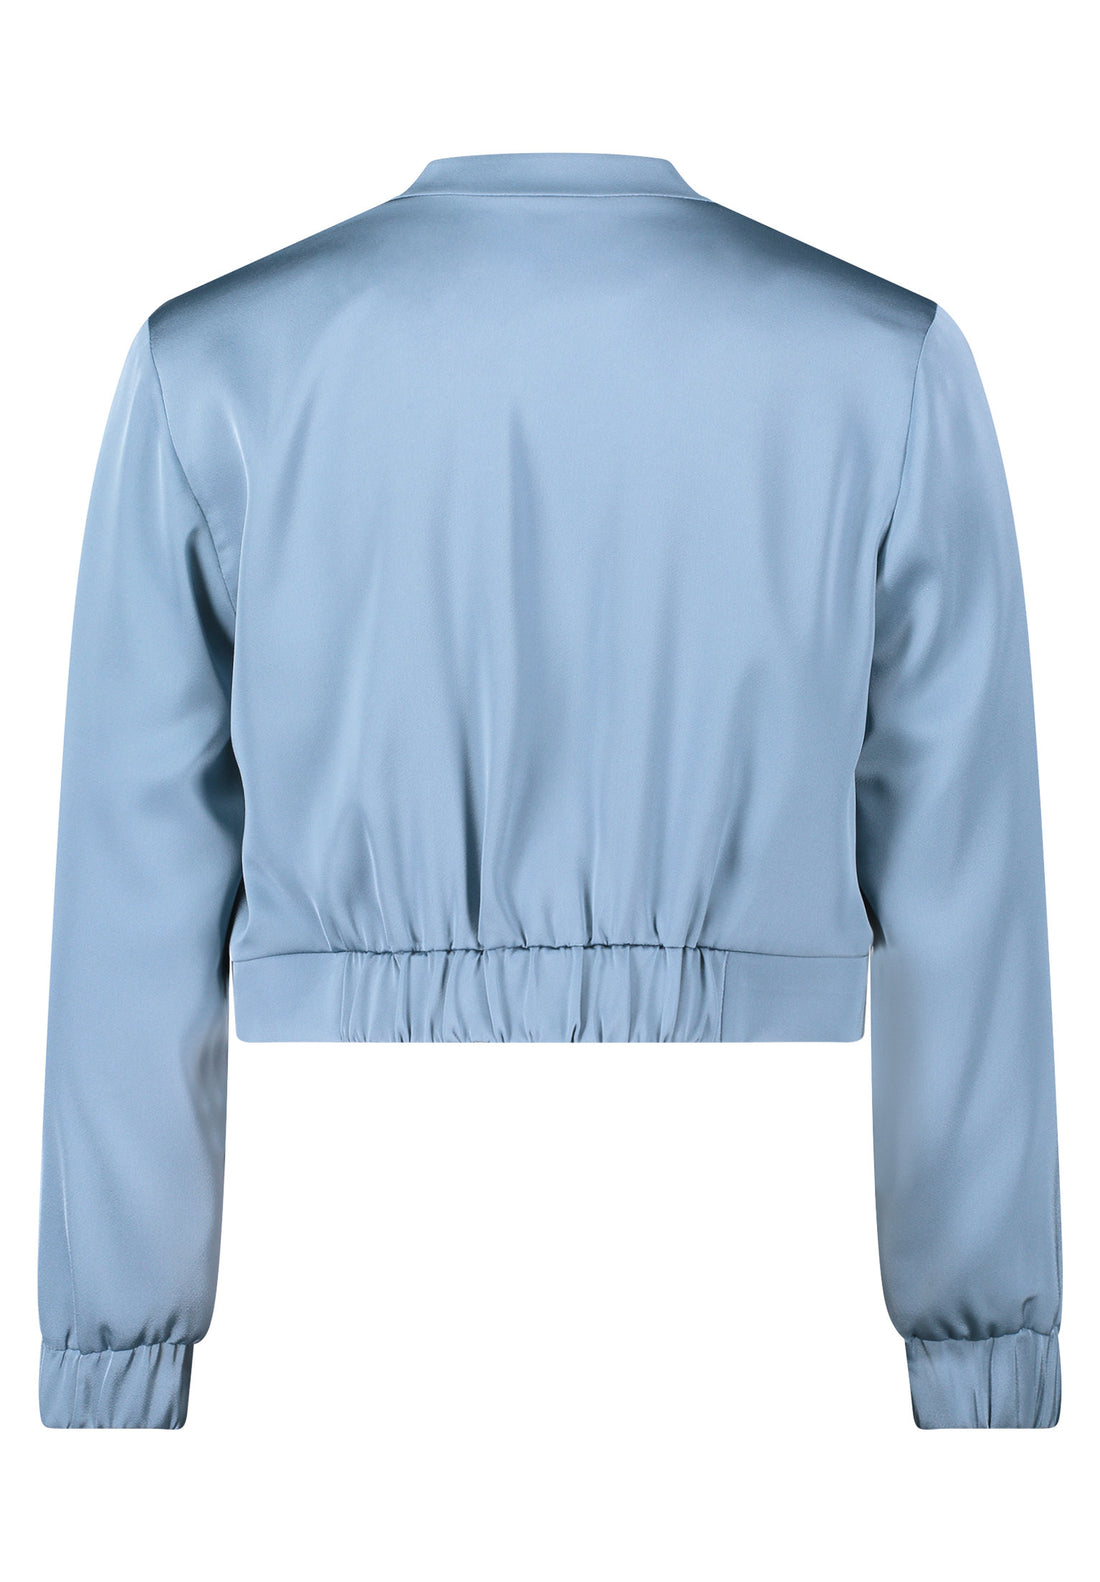 Cropped Bomber Jacket With No Closures_0305 4262_8307_02